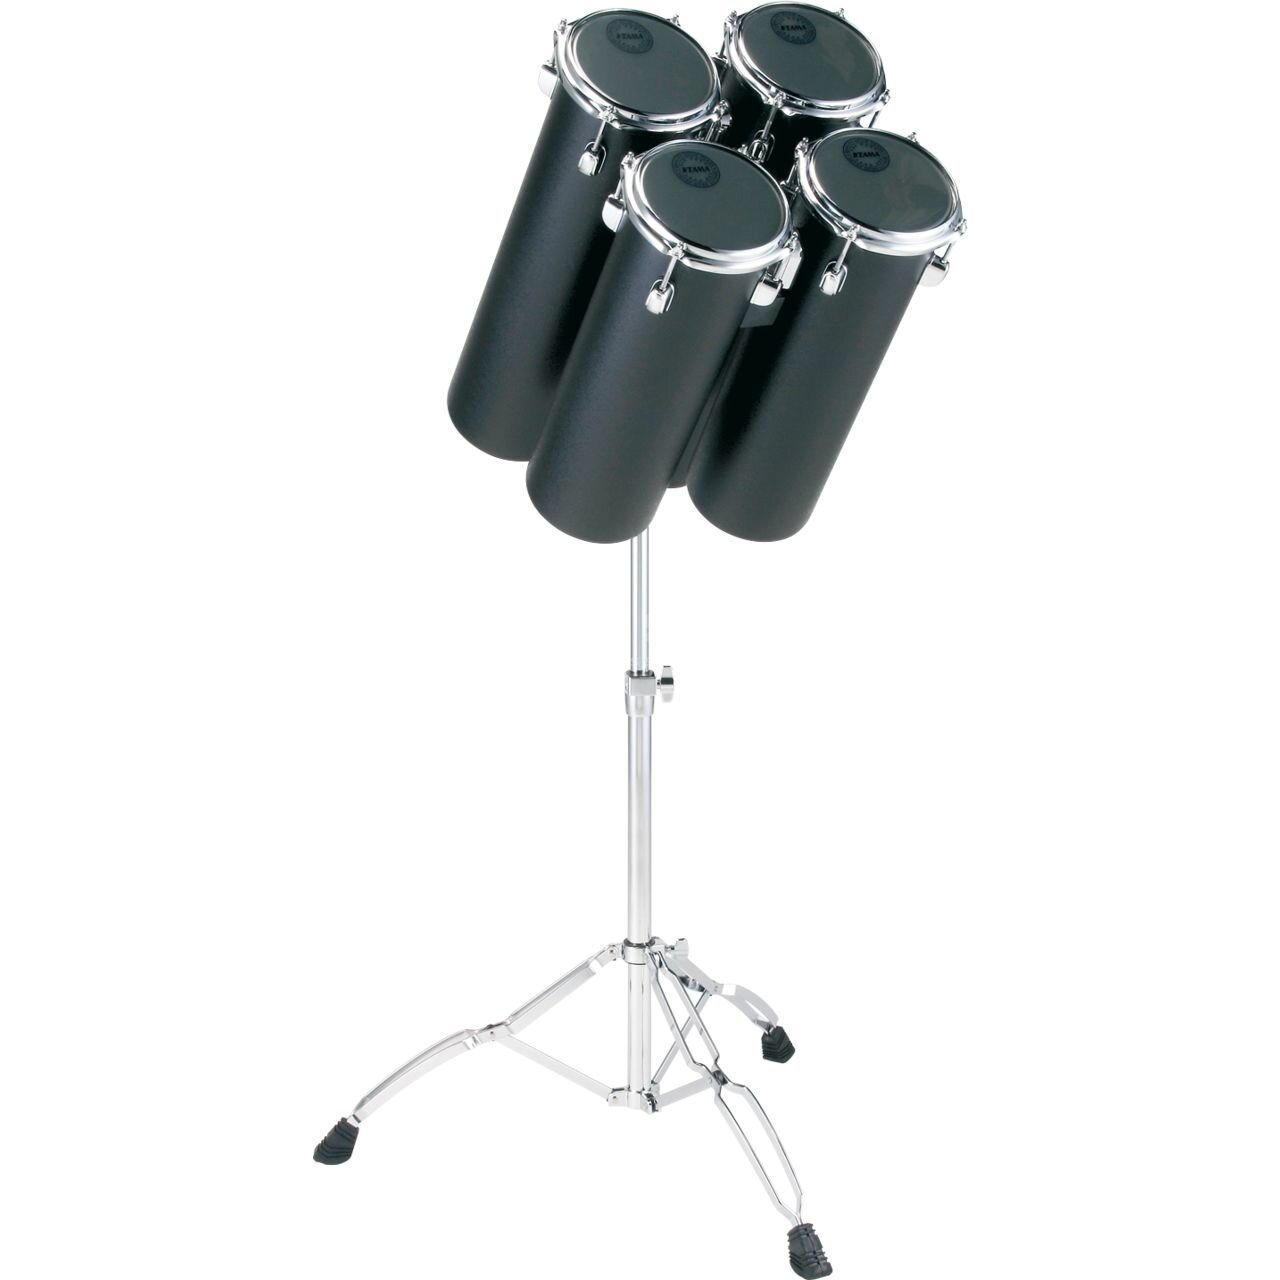 Tama octoban 4pc. set including HOW49W stand low-pitch set  (7850N4L) : photo 1